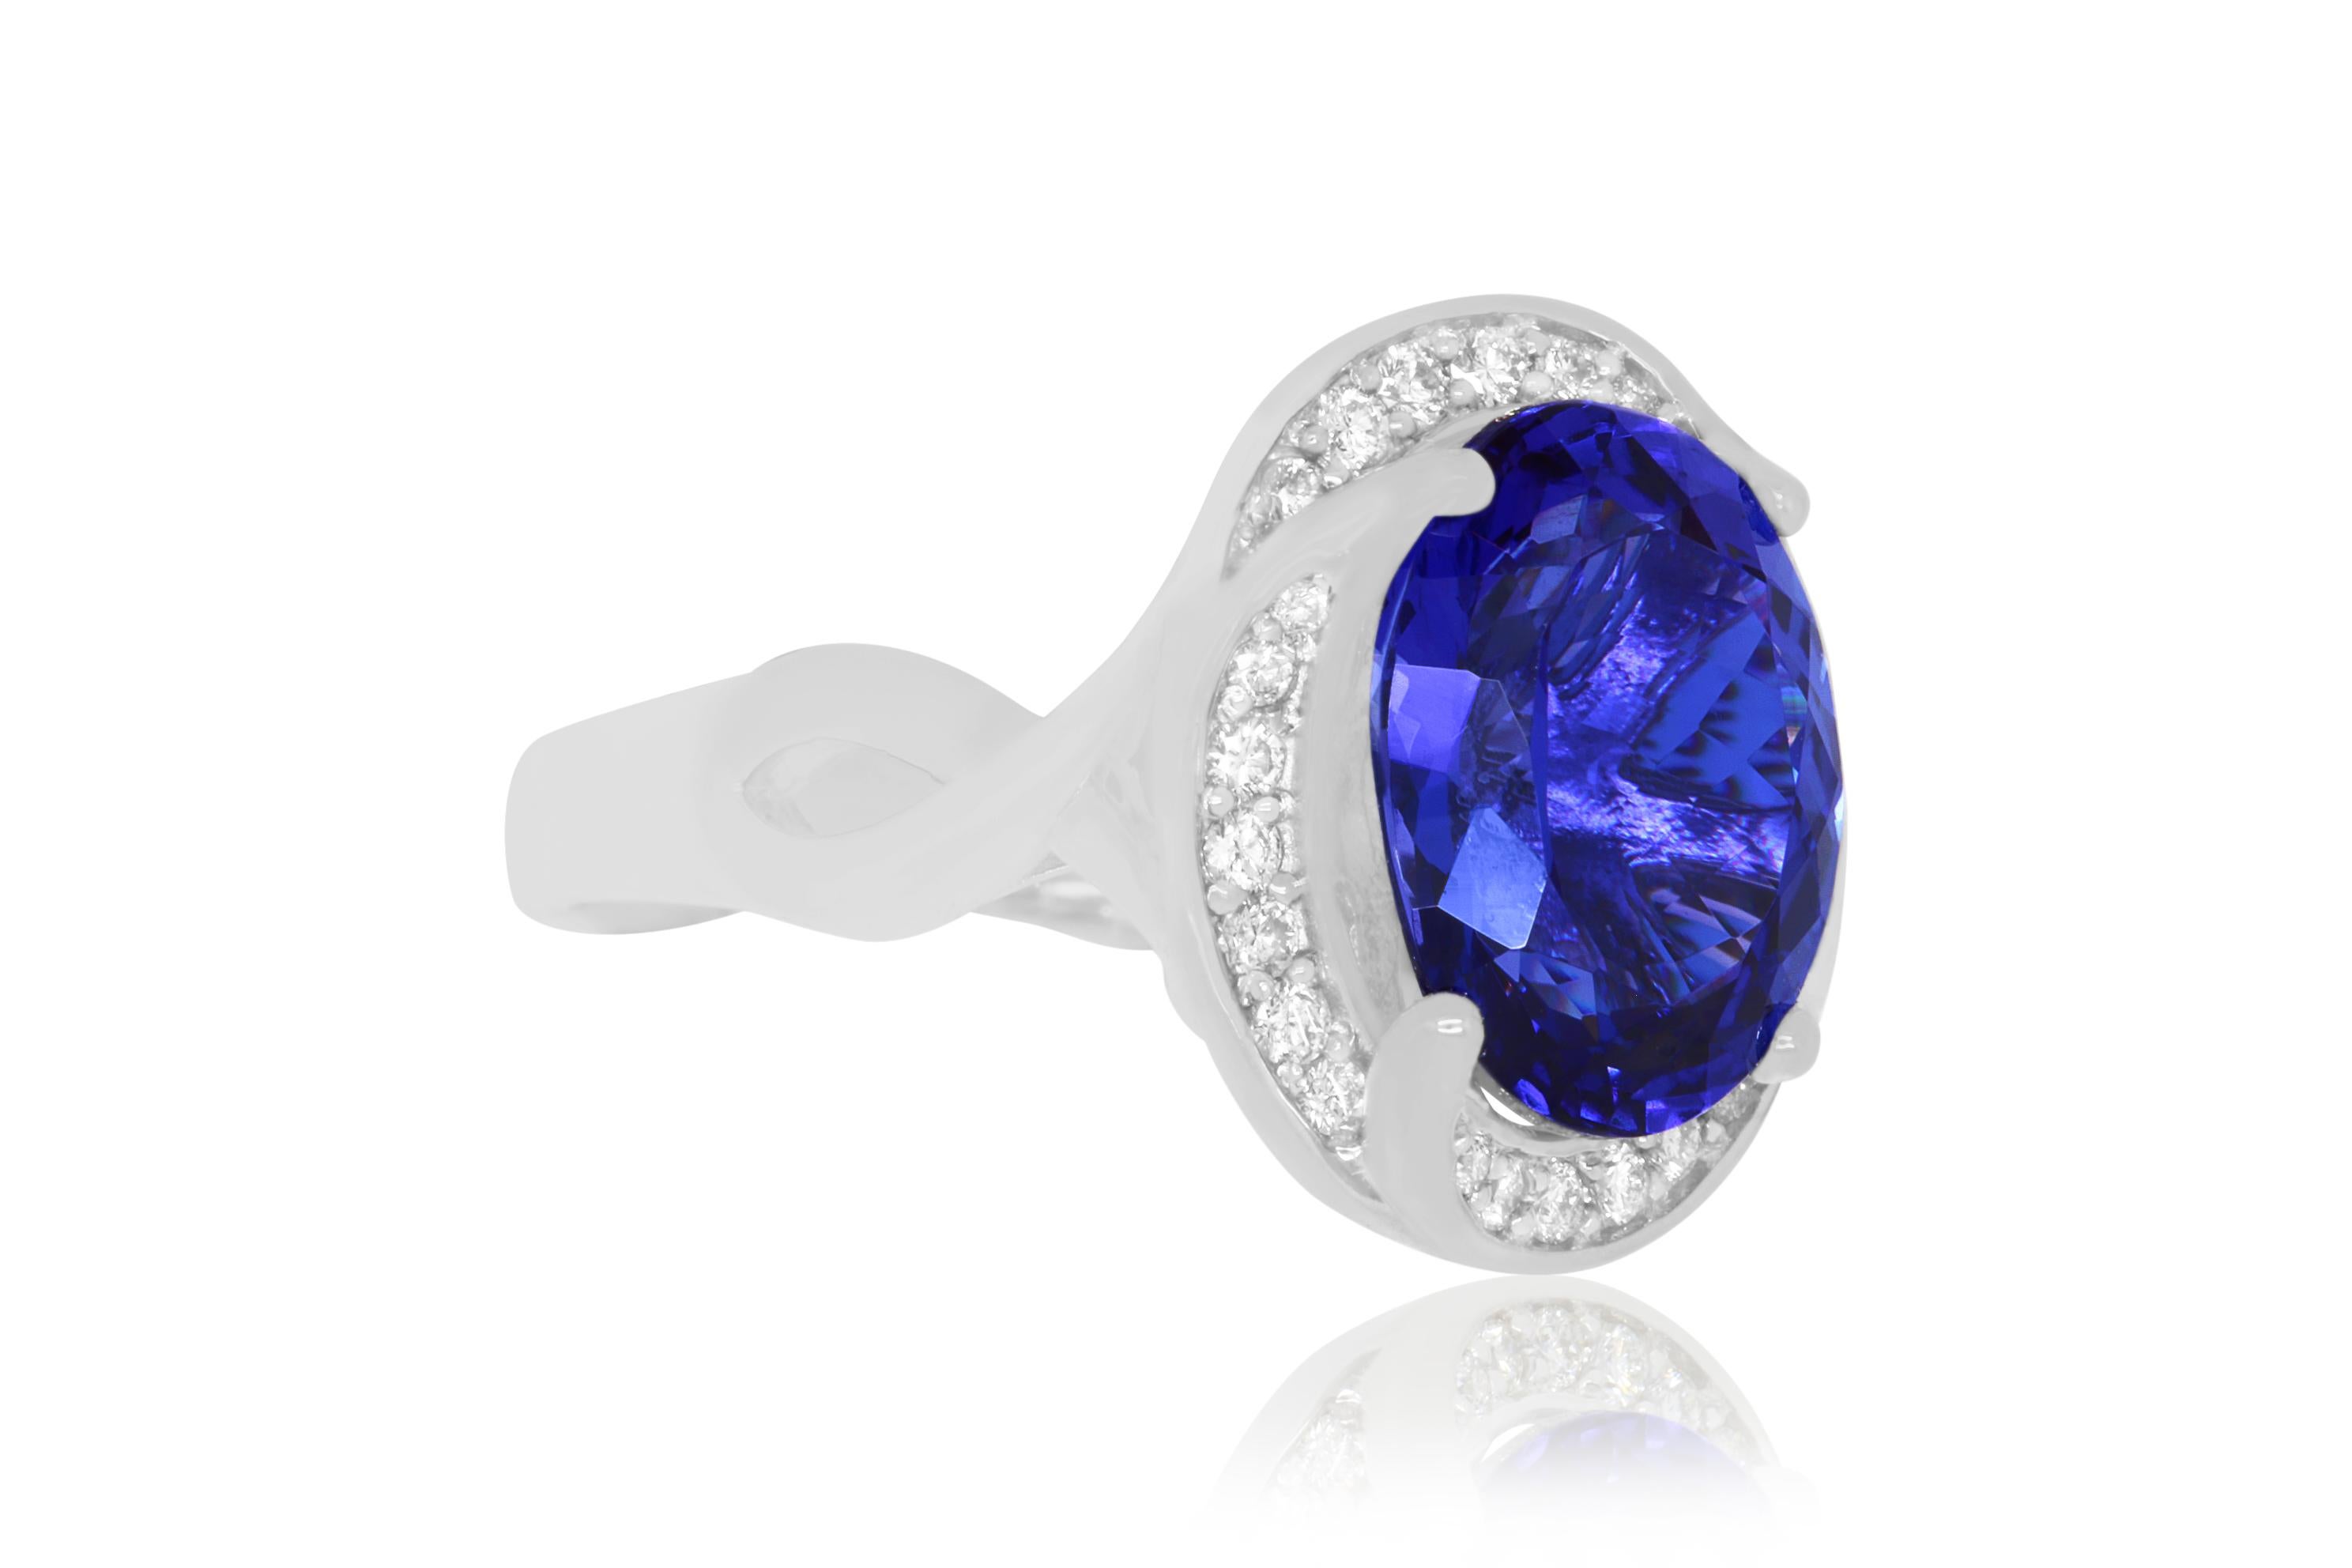 A stunning 6.31 Carat Oval Shaped Tanzanite is beautifuly set in a 14K white gold and surrounded by waves of dazzling round white diamonds totaling 0.31 Carats.

Material: 14k White Gold
Gemstones: 1 Oval Shaped Tanzanite at 6.31 Carats. - AAA